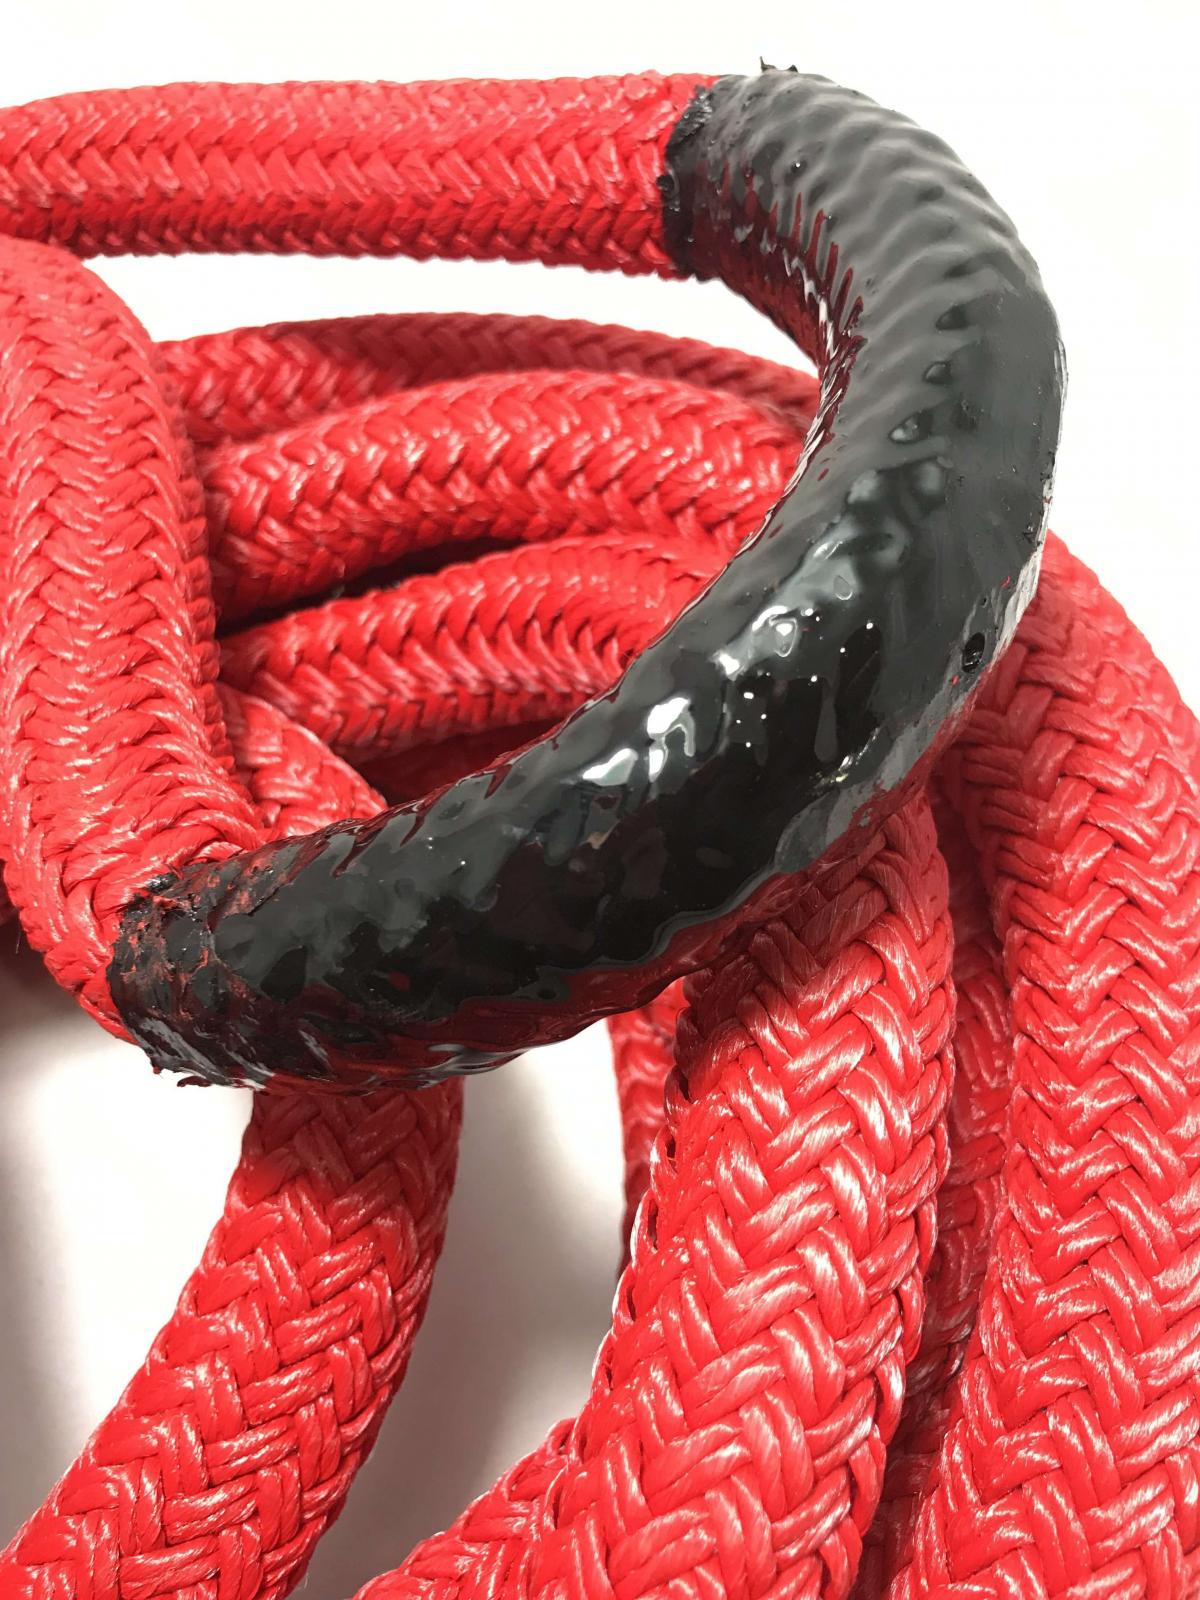 Factor 55 Extreme Duty Kinetic Energy Rope (7/8" x 30')